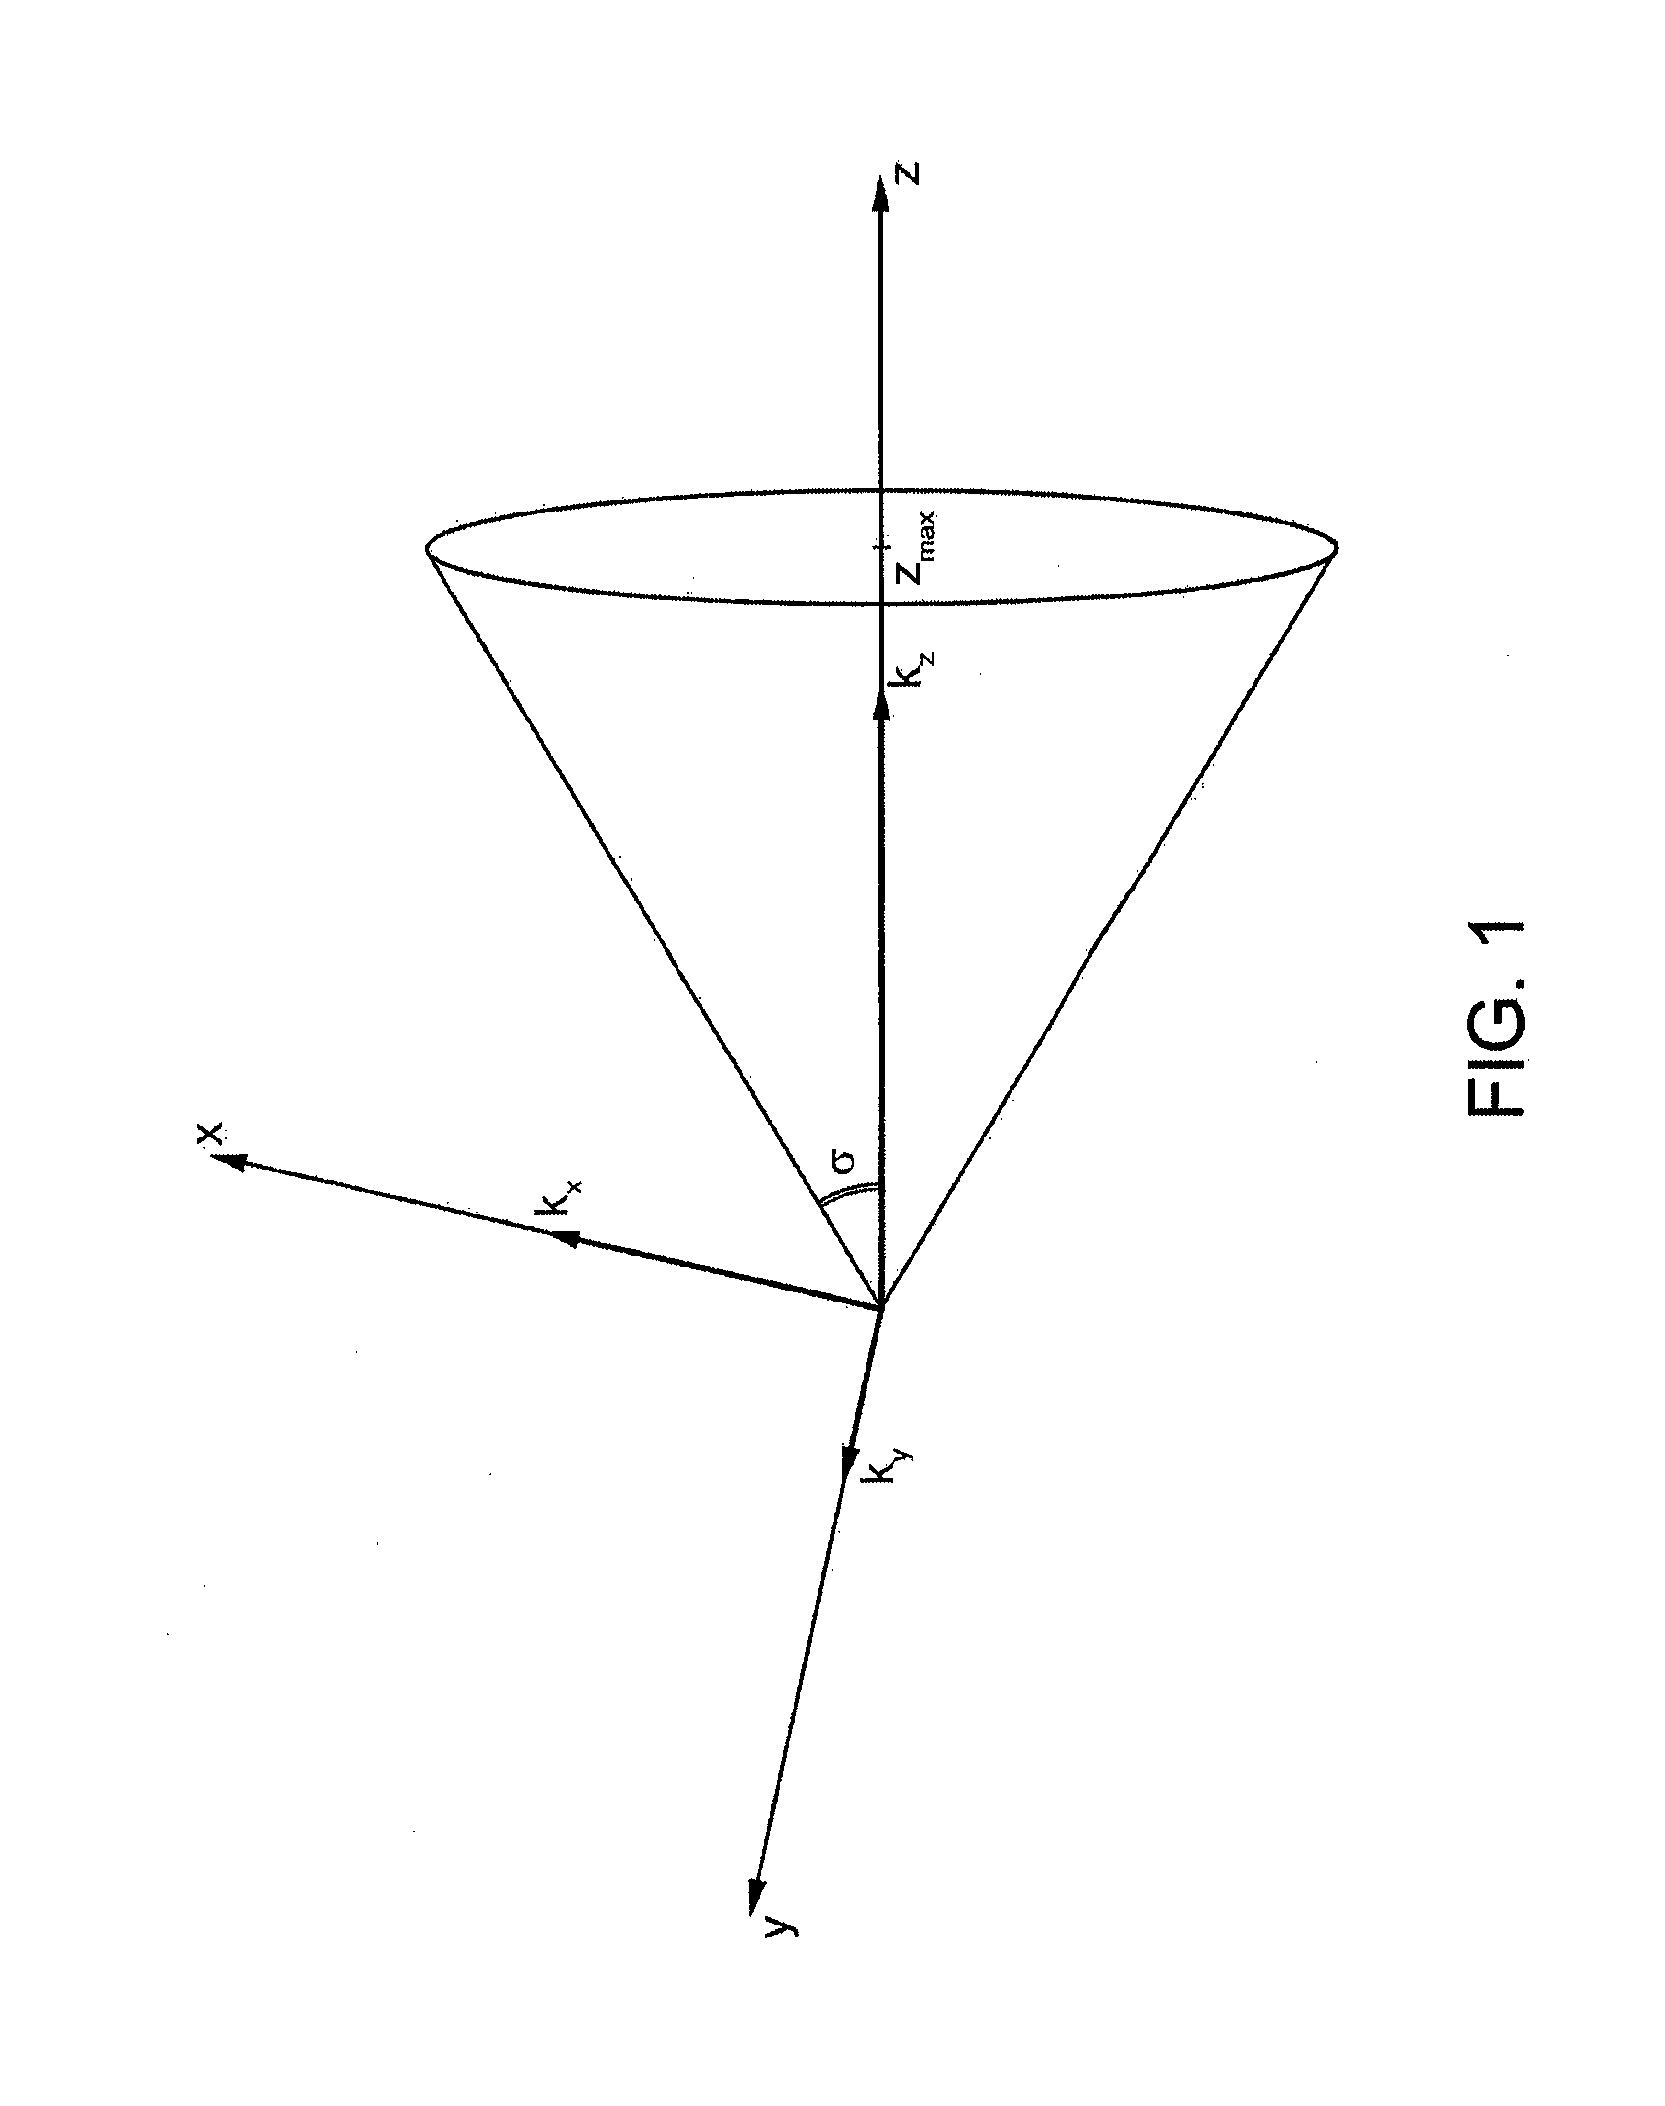 Slotted waveguide antenna for near-field focalization of electromagnetic radiation